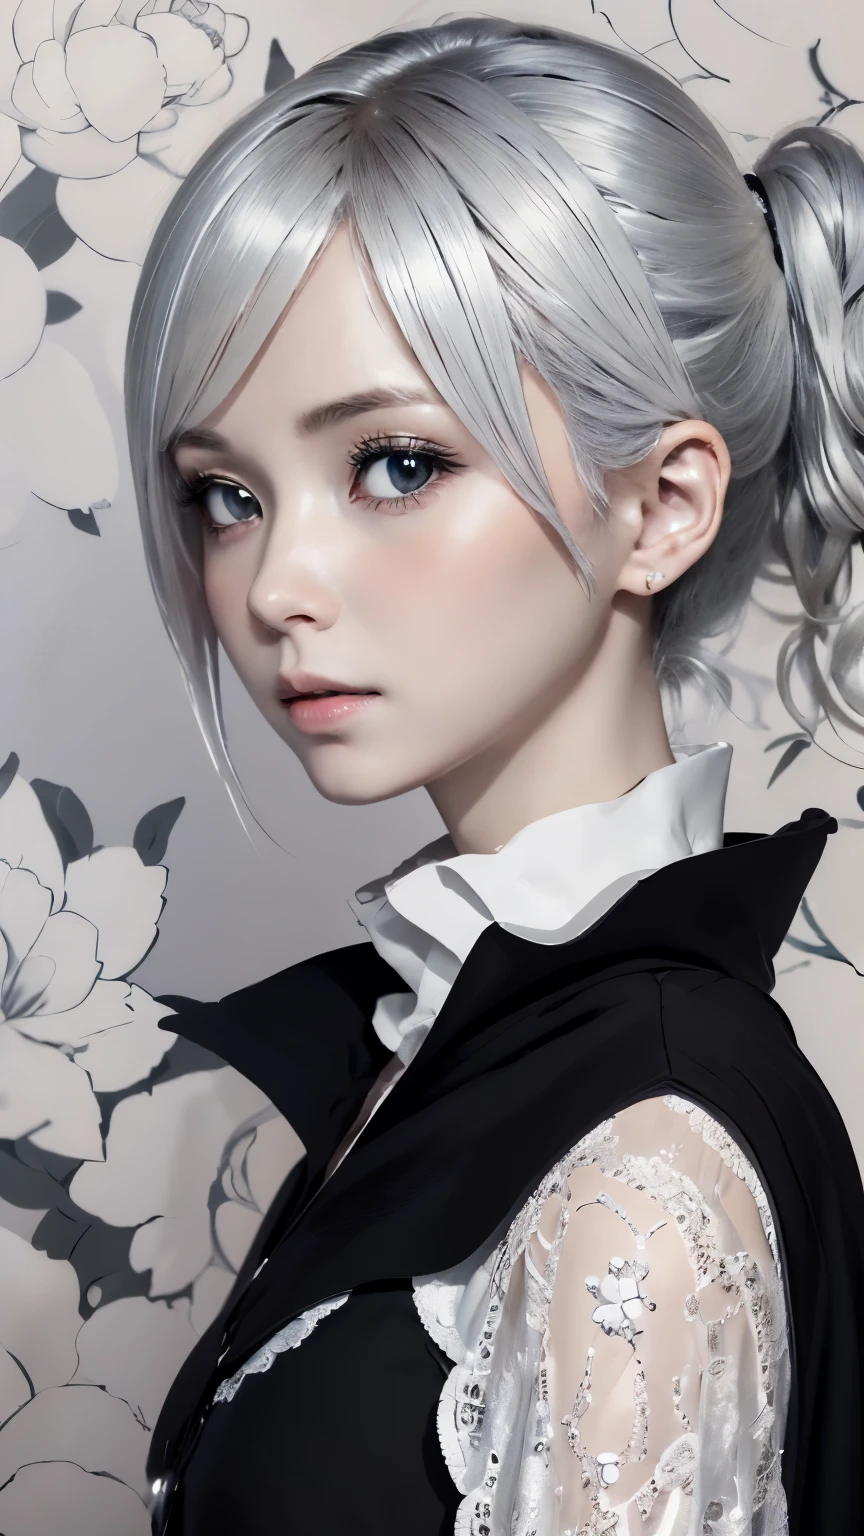 ((wallpaper 8k)), ((surreal)), ((Quality with attention to detail:1.2)), 1 girl, １４talent、cloak, black dress, capelet, blonde hair, look up, Widespread poverty, shortcut、short hair twintails、Ash gray hair、, white skin